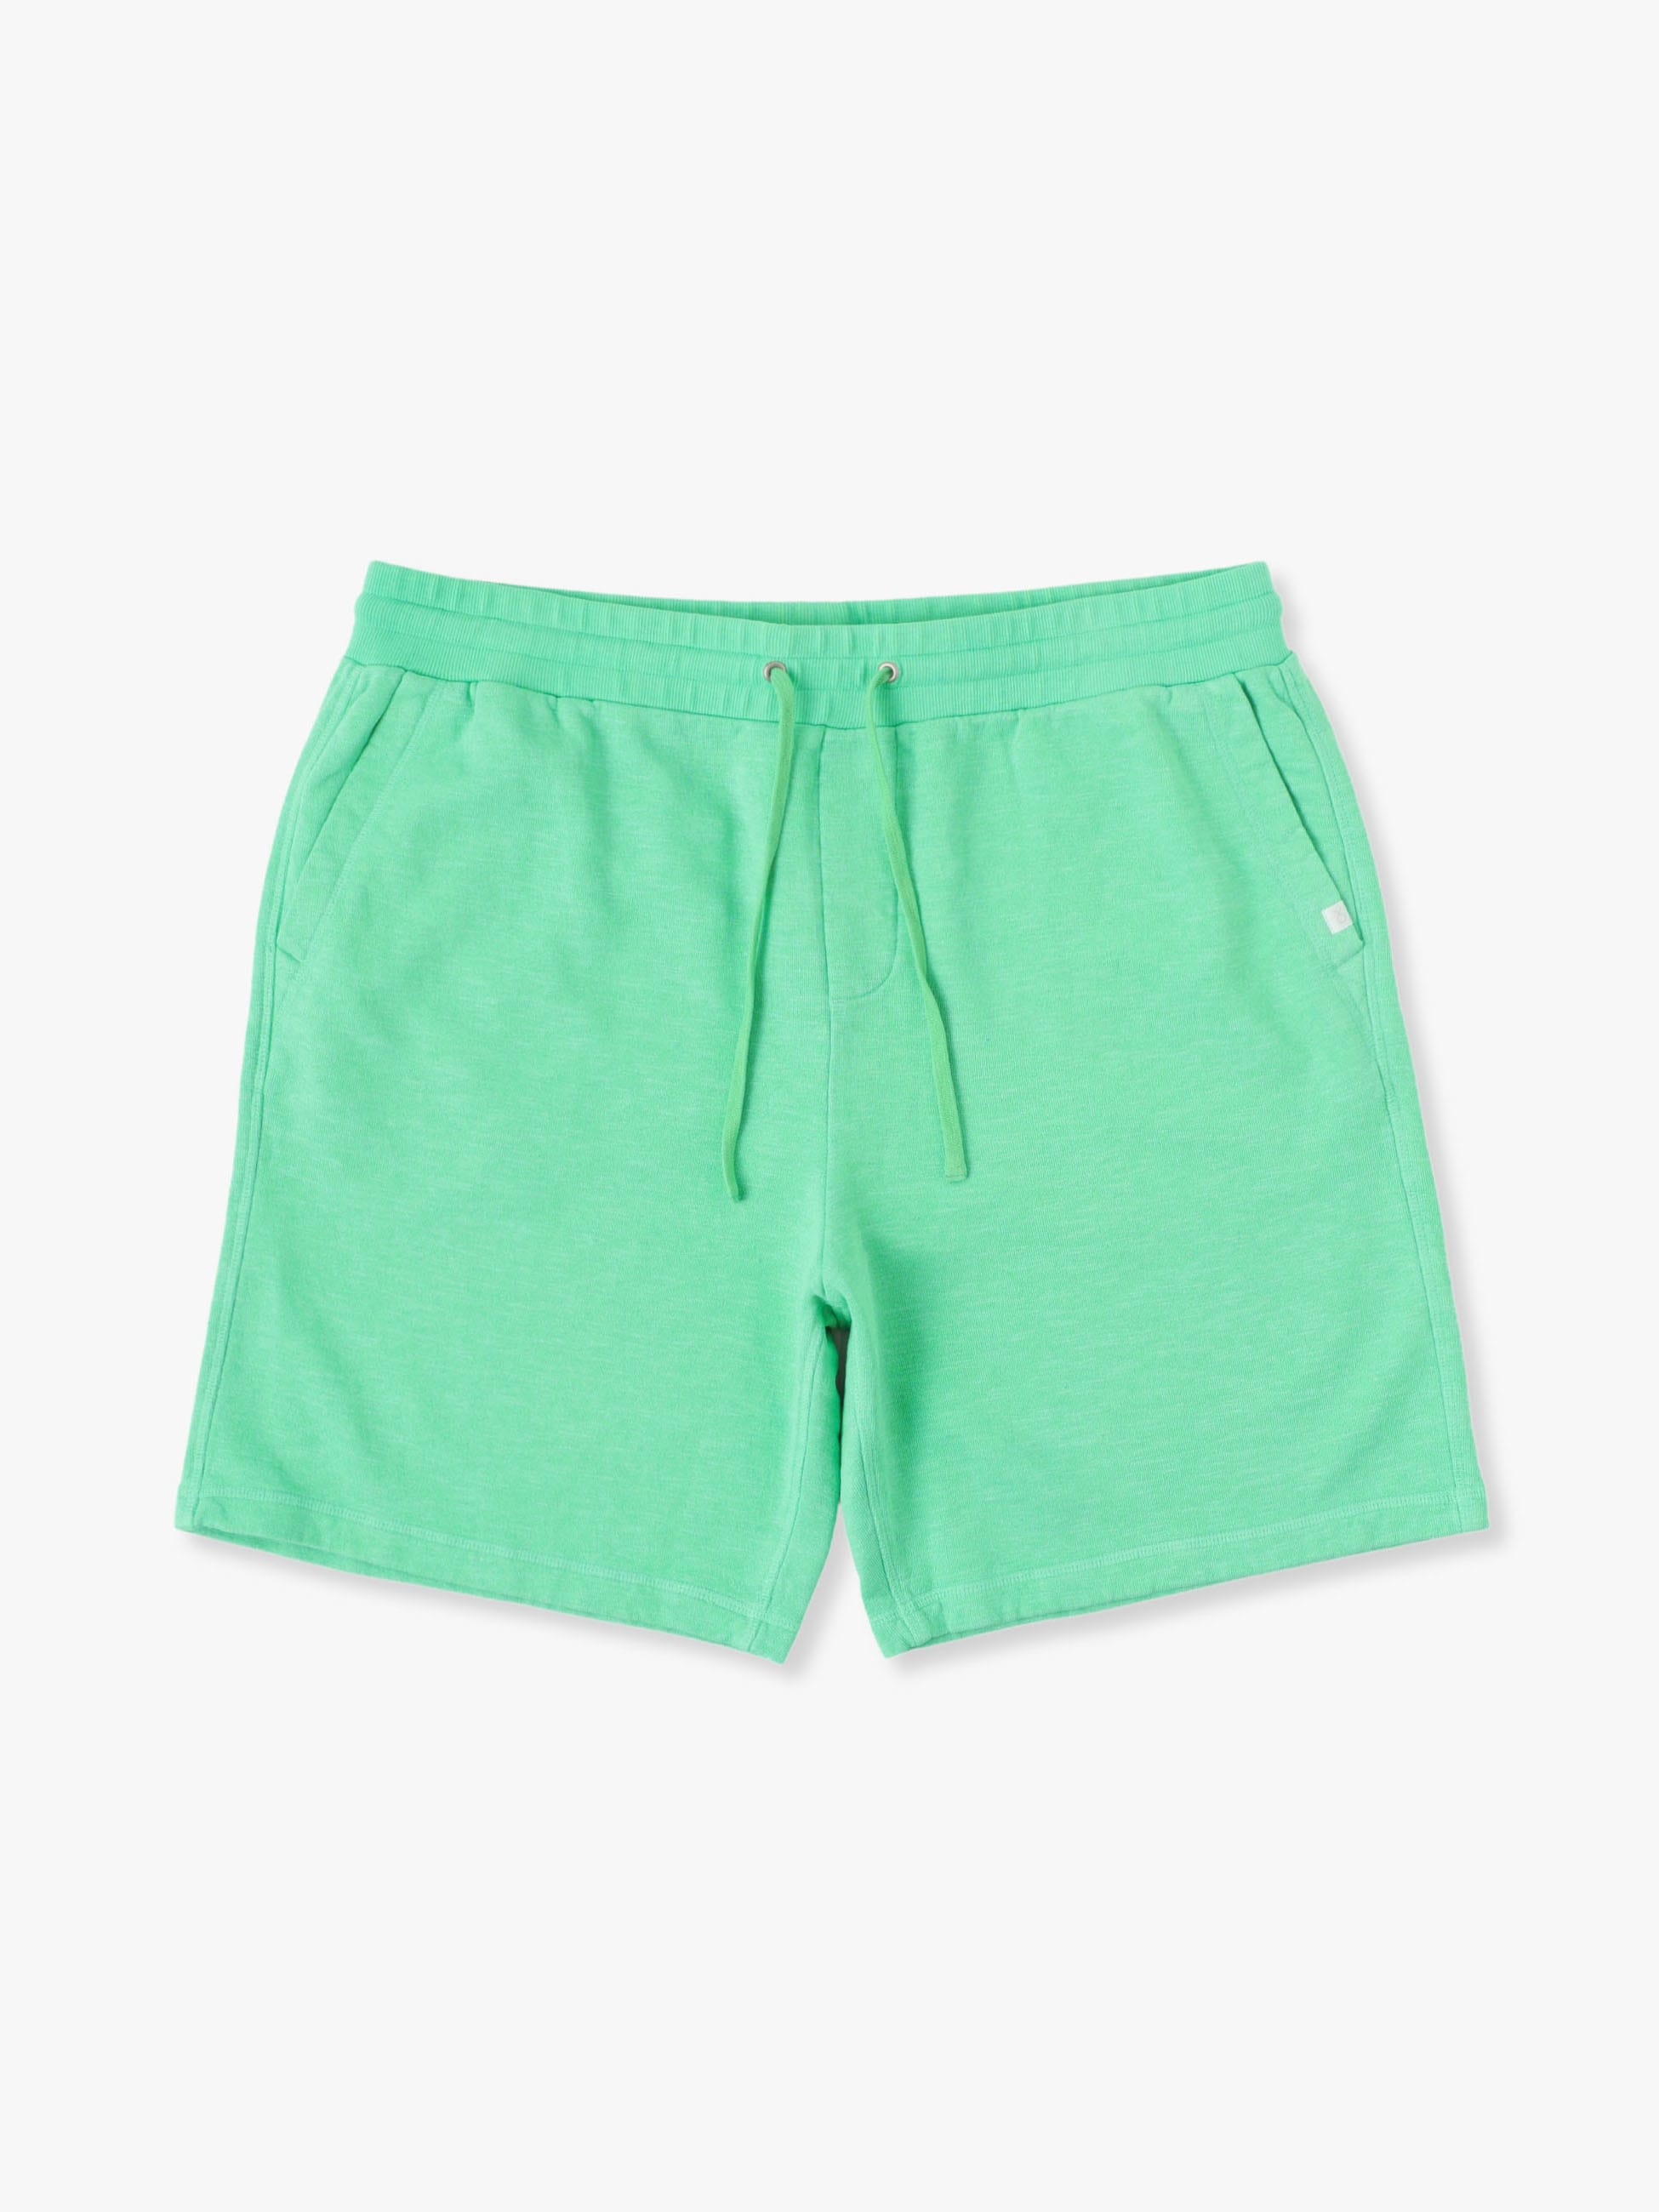 OUTERKNOWN Sweat Shorts ロンハーマン